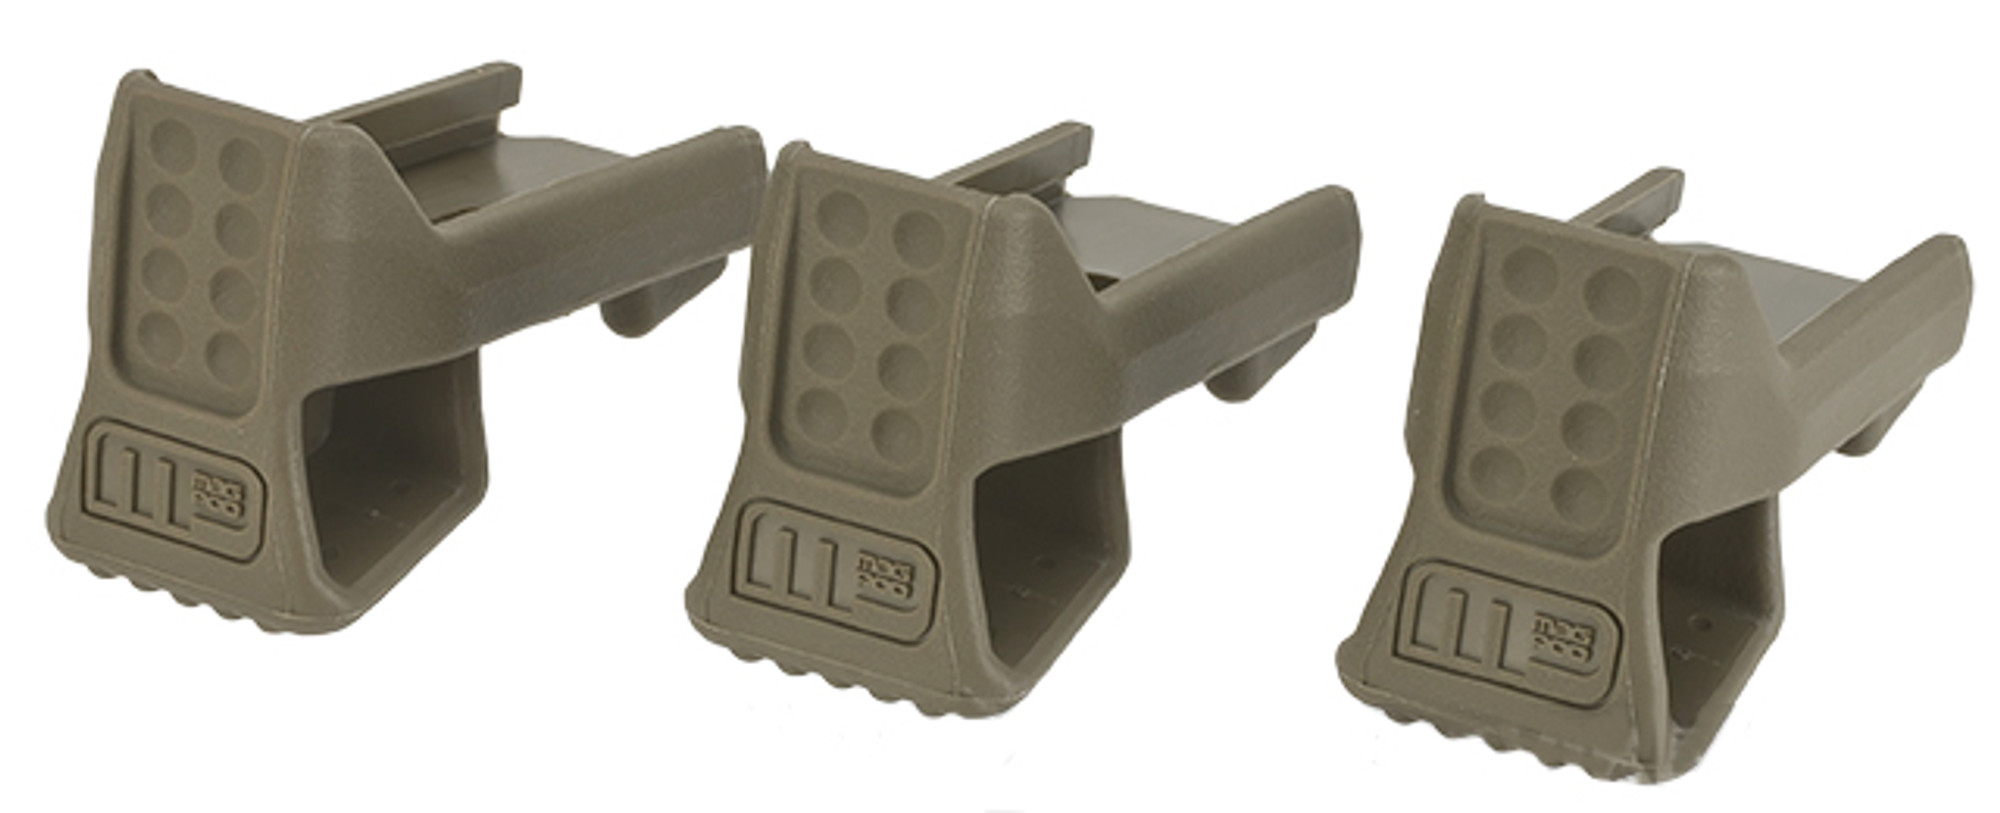 MagPod Magazine Baseplates for Gen 2 Magpul PMAGs - Tan (3-pack)